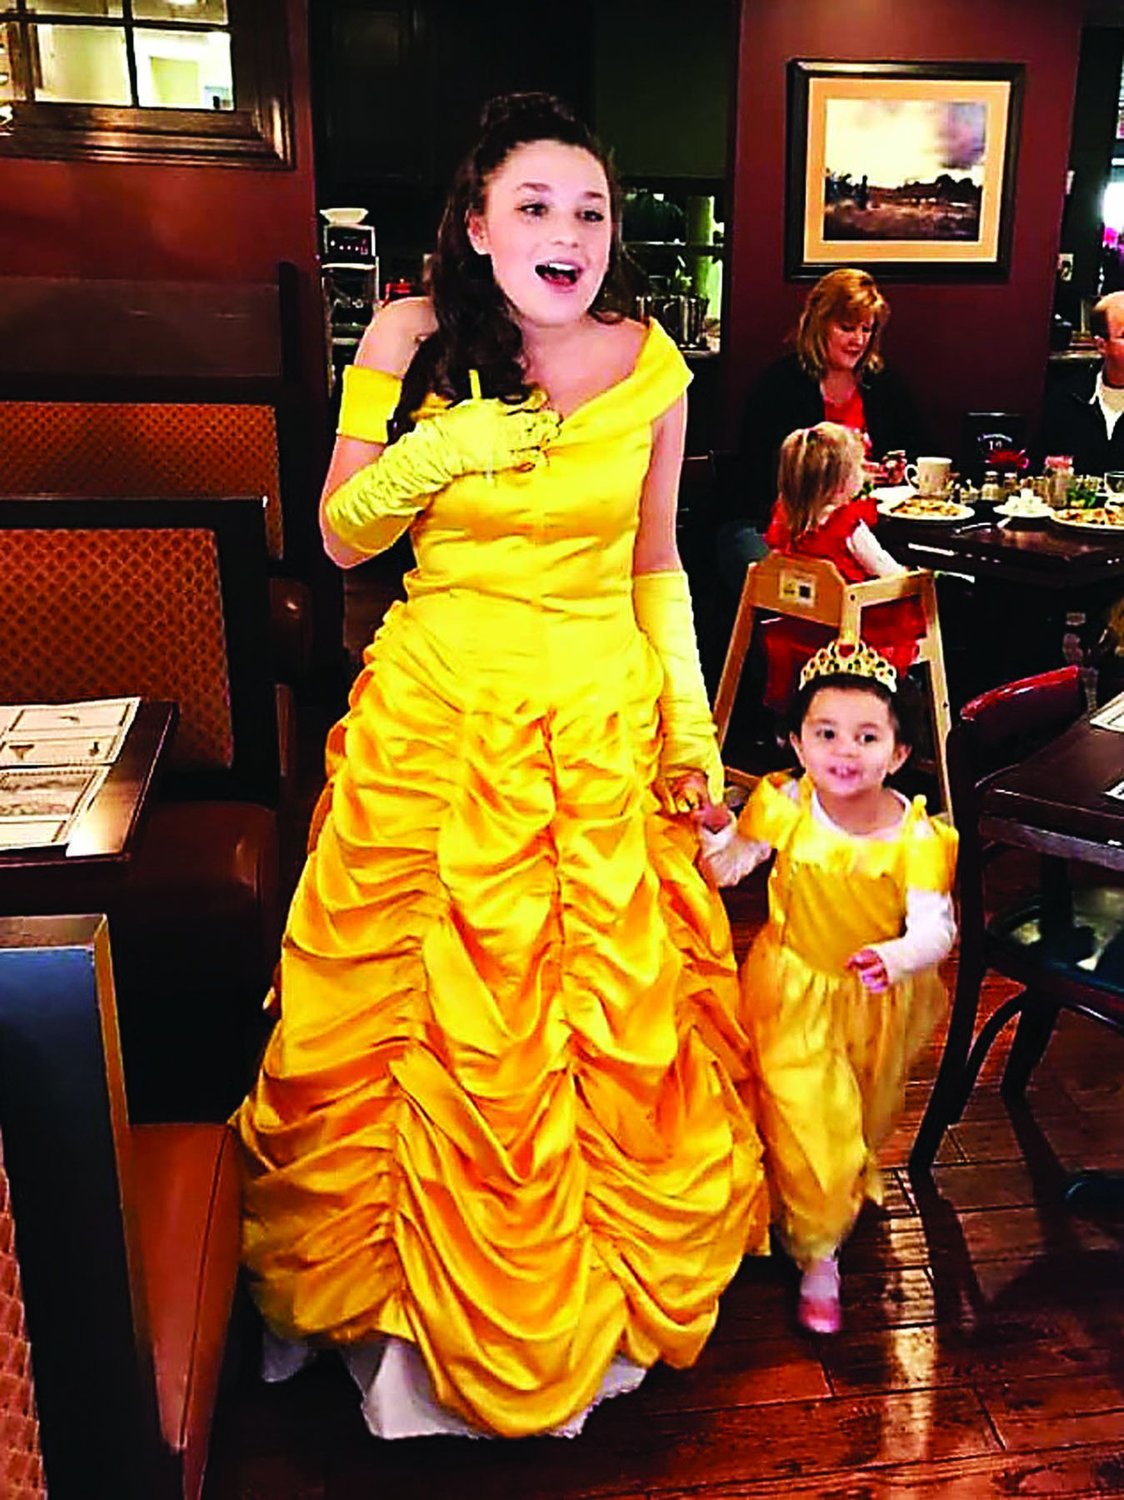 Anna Polsky as Belle from the Lenape Middle School Pancake Breakfast earlier this month.